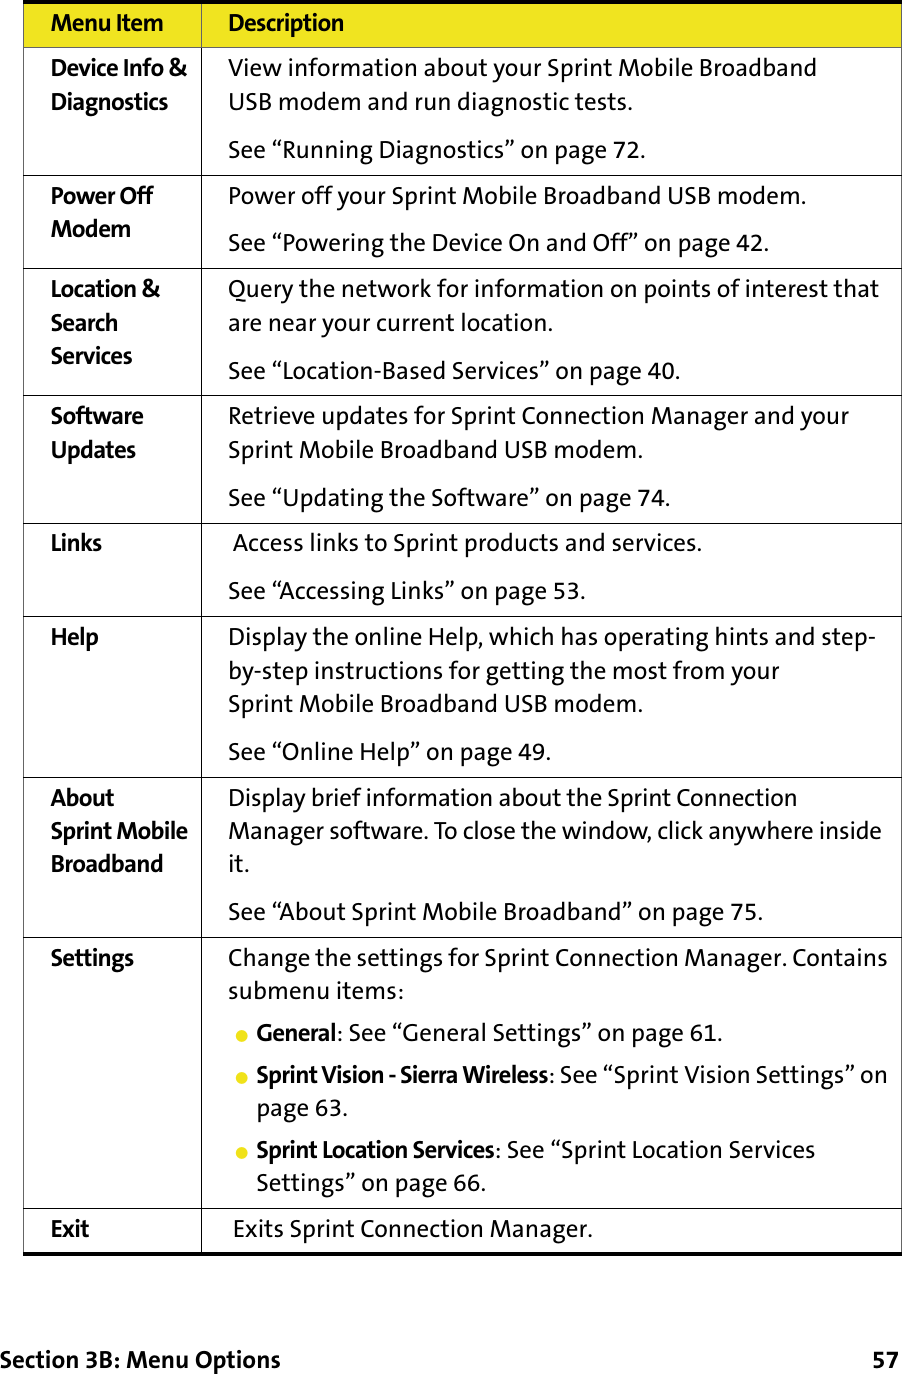 Section 3B: Menu Options      57Device Info &amp; DiagnosticsView information about your Sprint Mobile Broadband USB modem and run diagnostic tests. See “Running Diagnostics” on page 72.Power Off ModemPower off your Sprint Mobile Broadband USB modem.See “Powering the Device On and Off” on page 42.Location &amp; Search ServicesQuery the network for information on points of interest that are near your current location.See “Location-Based Services” on page 40.Software UpdatesRetrieve updates for Sprint Connection Manager and your Sprint Mobile Broadband USB modem. See “Updating the Software” on page 74.Links  Access links to Sprint products and services. See “Accessing Links” on page 53.Help Display the online Help, which has operating hints and step-by-step instructions for getting the most from your Sprint Mobile Broadband USB modem. See “Online Help” on page 49.About Sprint Mobile BroadbandDisplay brief information about the Sprint Connection Manager software. To close the window, click anywhere inside it. See “About Sprint Mobile Broadband” on page 75.Settings Change the settings for Sprint Connection Manager. Contains submenu items:䢇General: See “General Settings” on page 61.䢇Sprint Vision - Sierra Wireless: See “Sprint Vision Settings” on page 63.䢇Sprint Location Services: See “Sprint Location Services Settings” on page 66.Exit  Exits Sprint Connection Manager.Menu Item Description